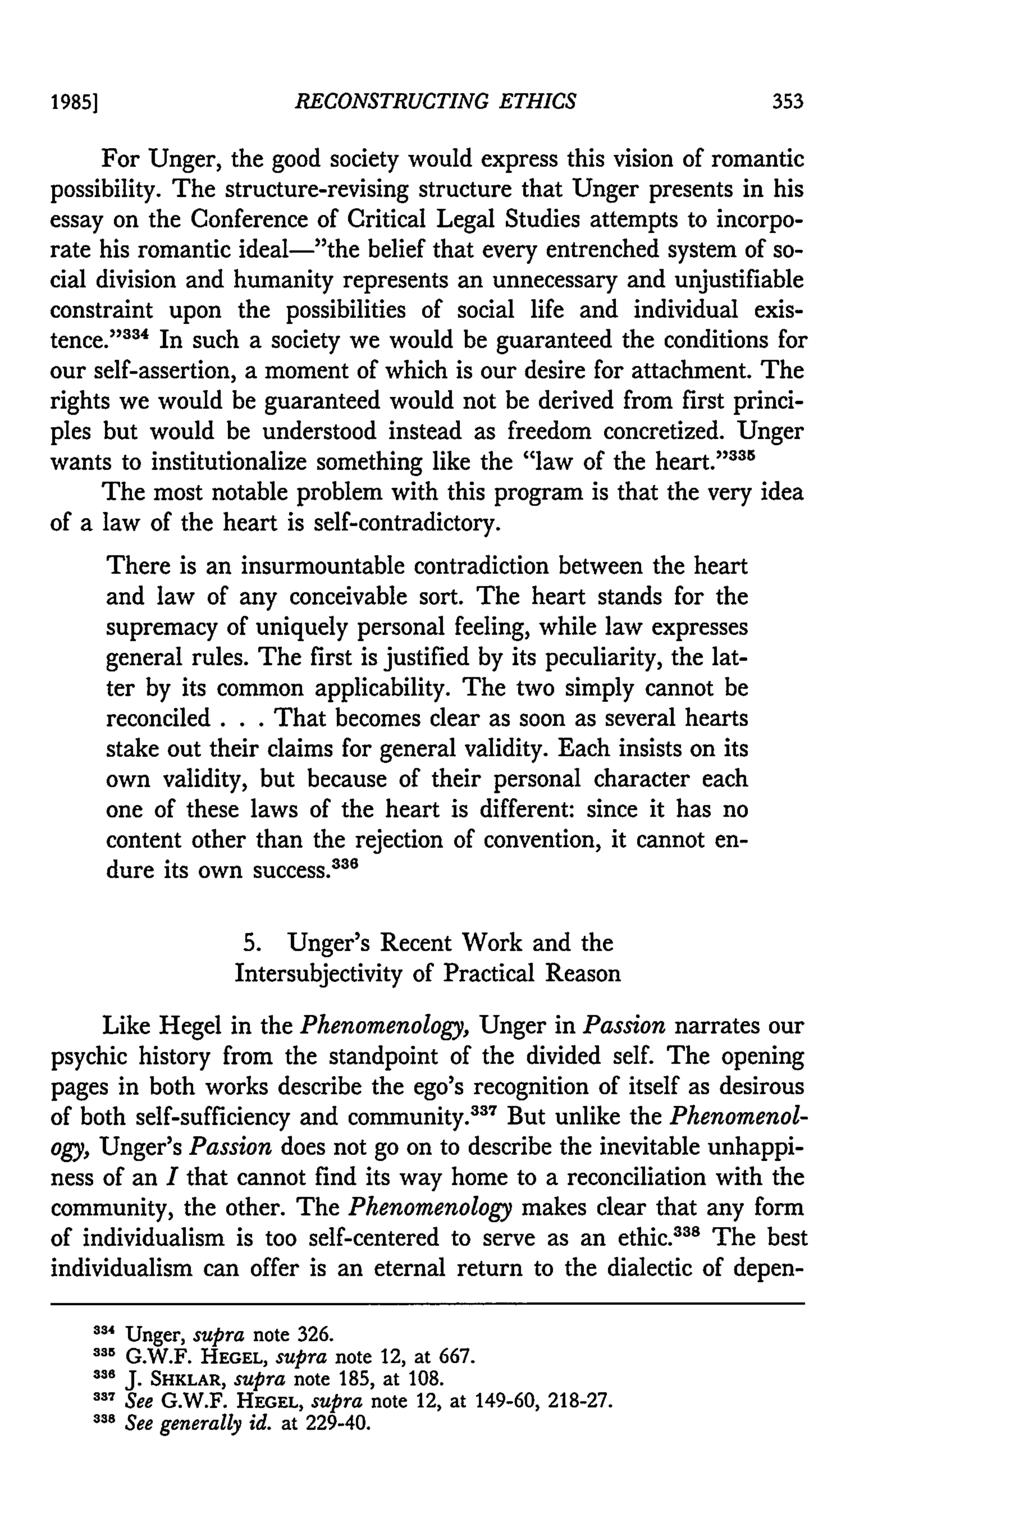 1985] RECONSTRUCTING ETHICS For Unger, the good society would express this vision of romantic possibility.